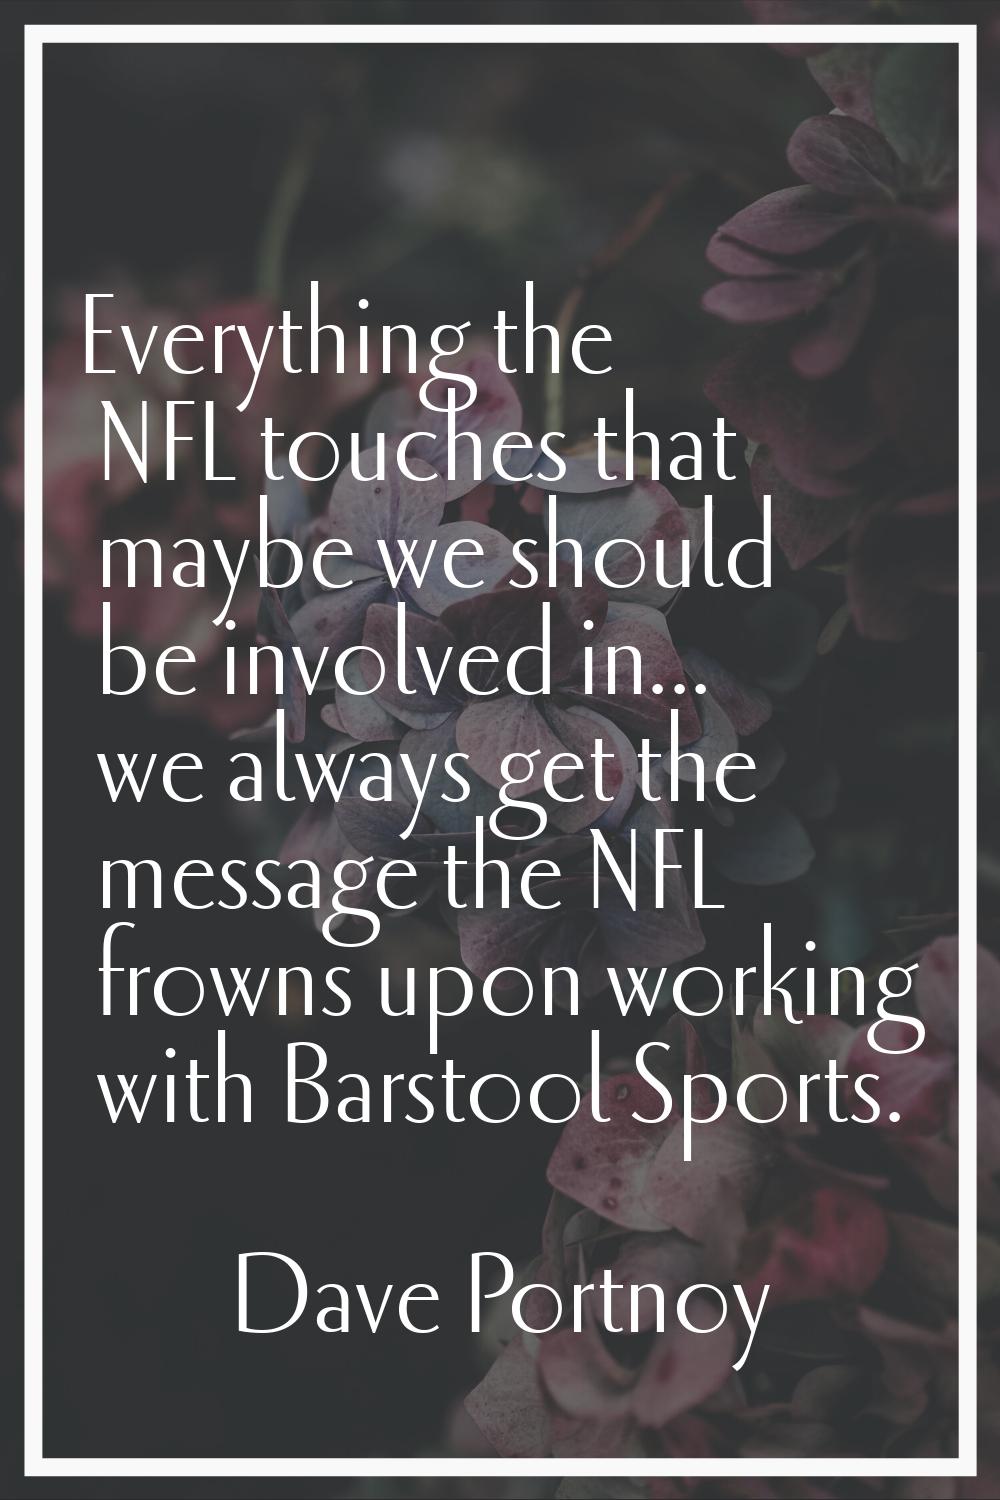 Everything the NFL touches that maybe we should be involved in... we always get the message the NFL